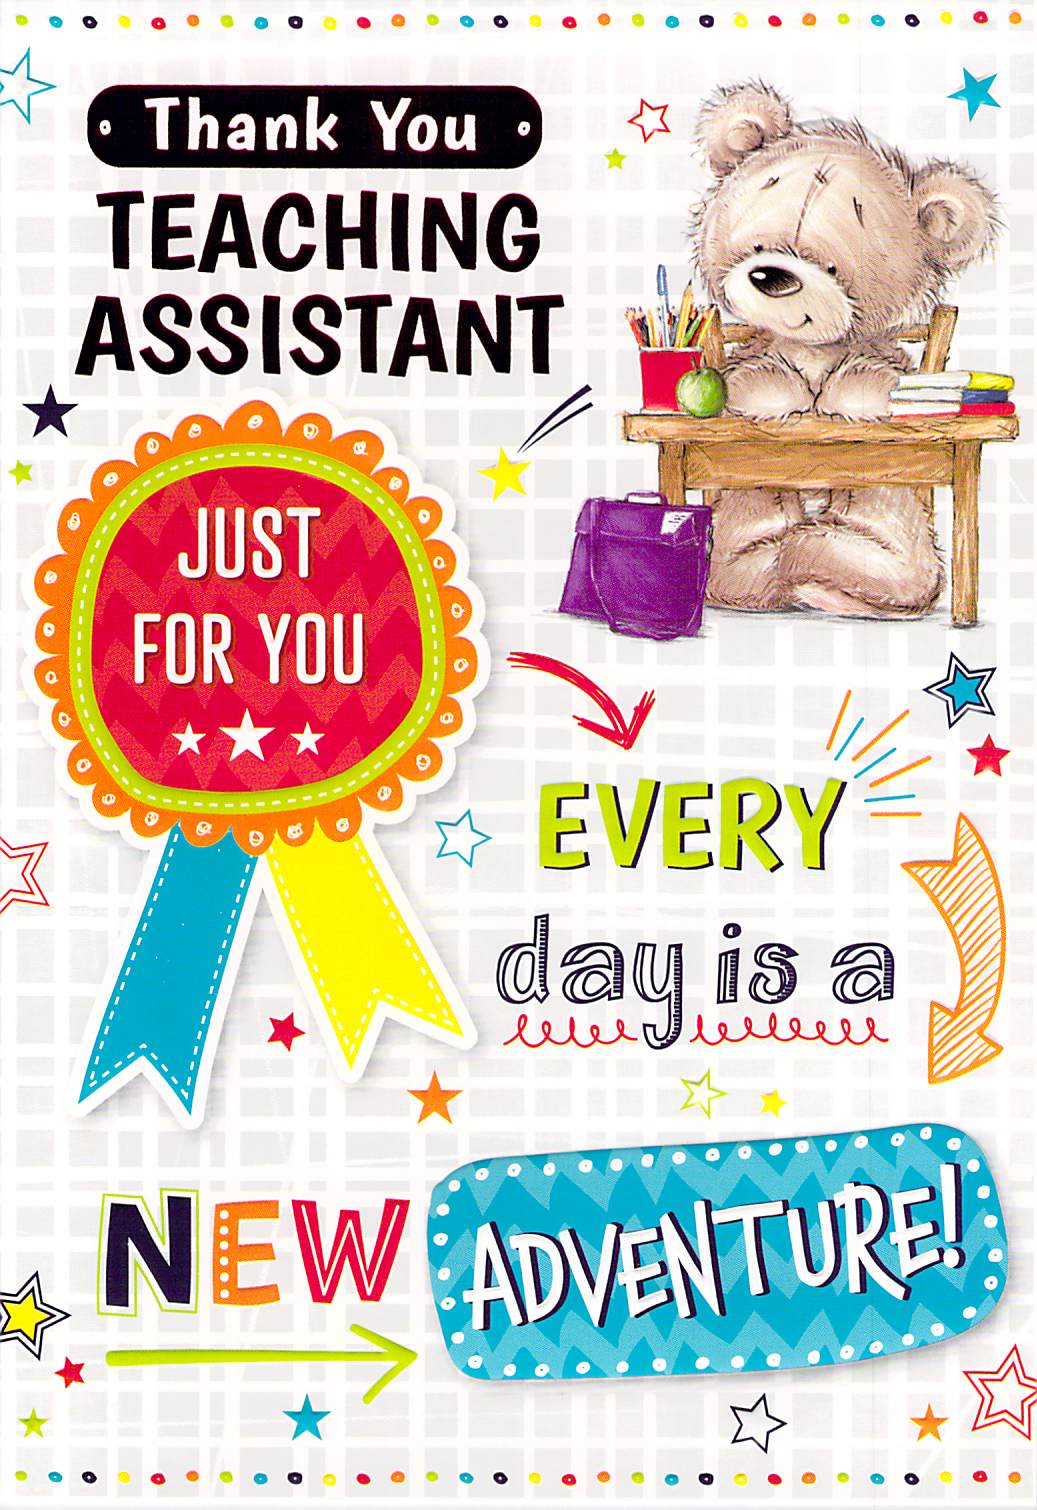 Thank You Teaching Assistant - Greeting Card - Free Postage